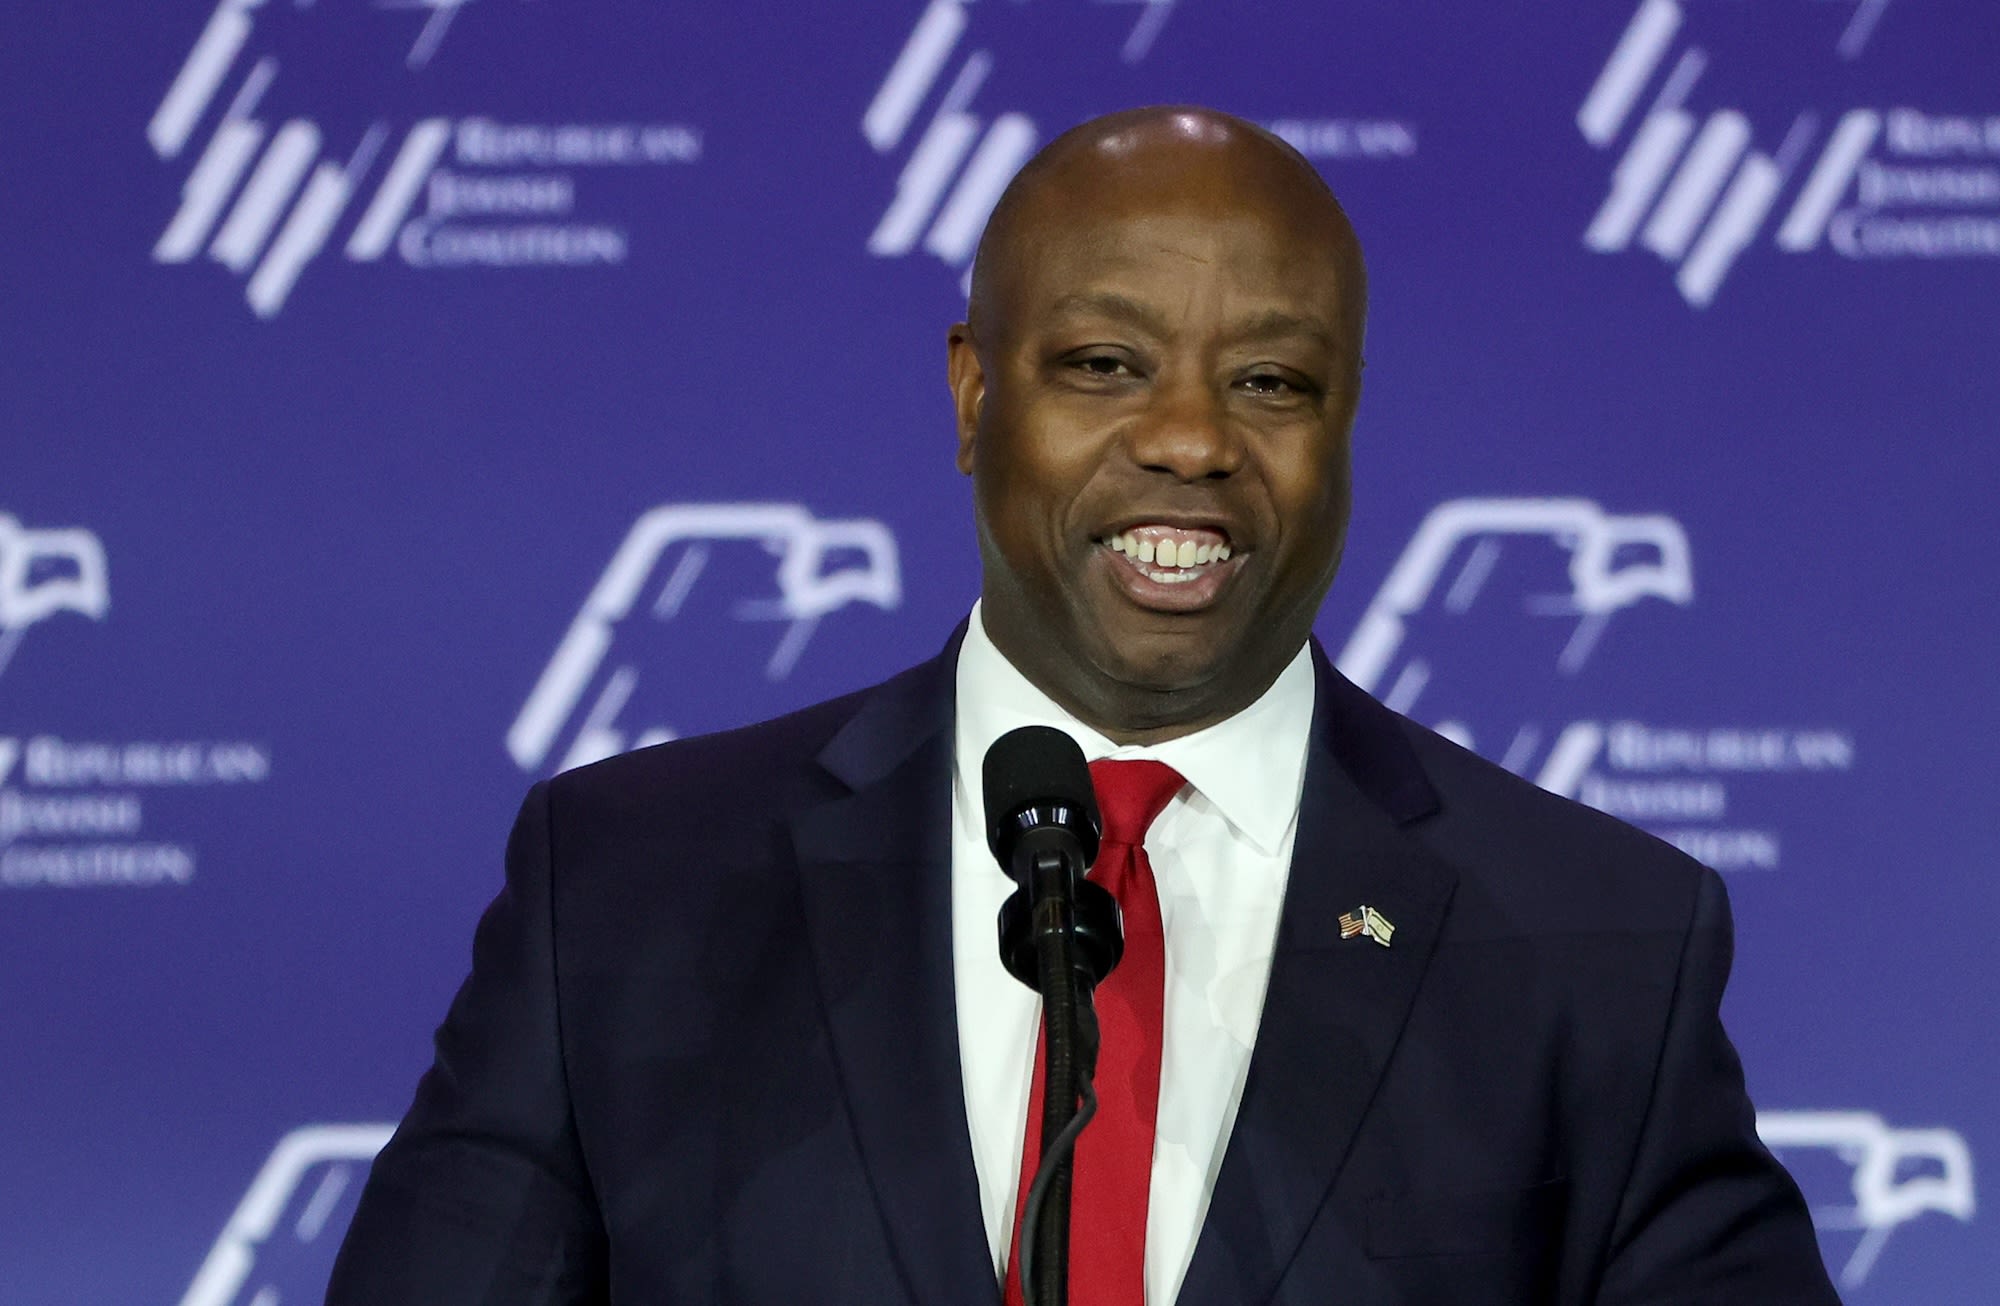 Tim Scott Embraces Trump’s Election Denialism, Won’t Commit to Accept Results